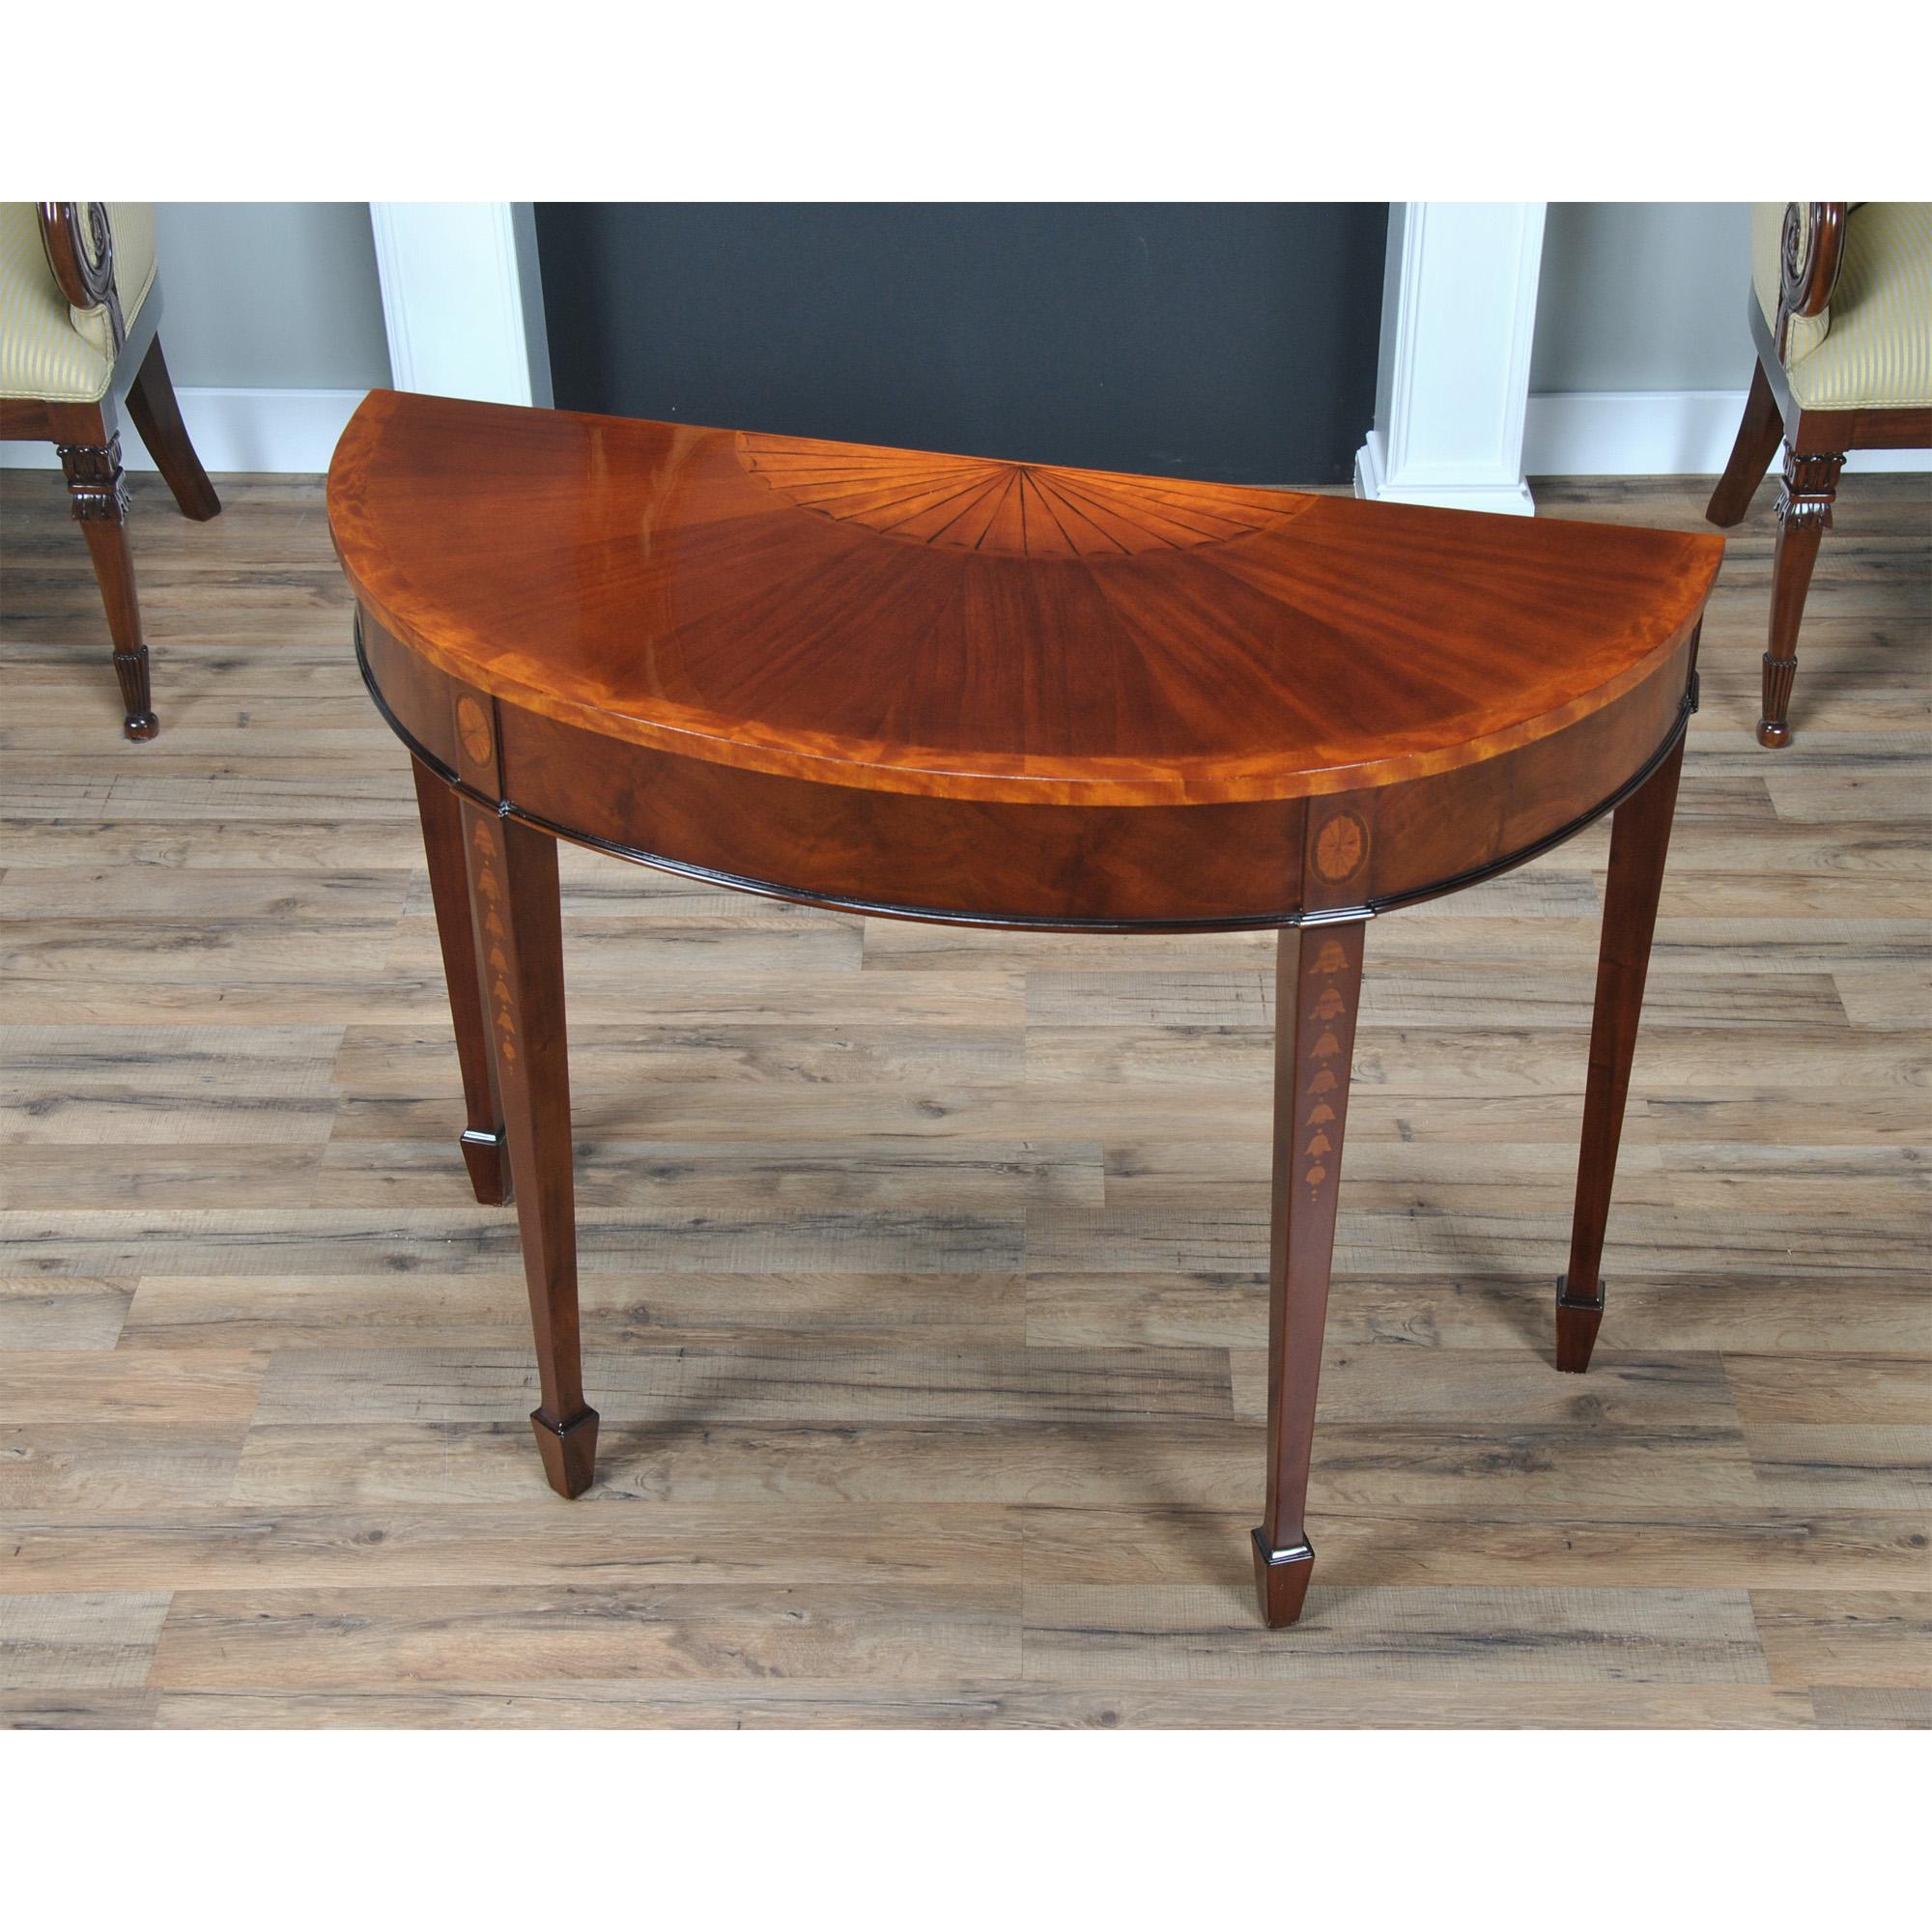 A high quality Mahogany Inlaid Sunburst Console table which makes elaborate use of hand cut inlays. The mahogany top is banded with satinwood and features a sunburst style inlay in the center, the four legs at the apron have oval fan shaped inlays